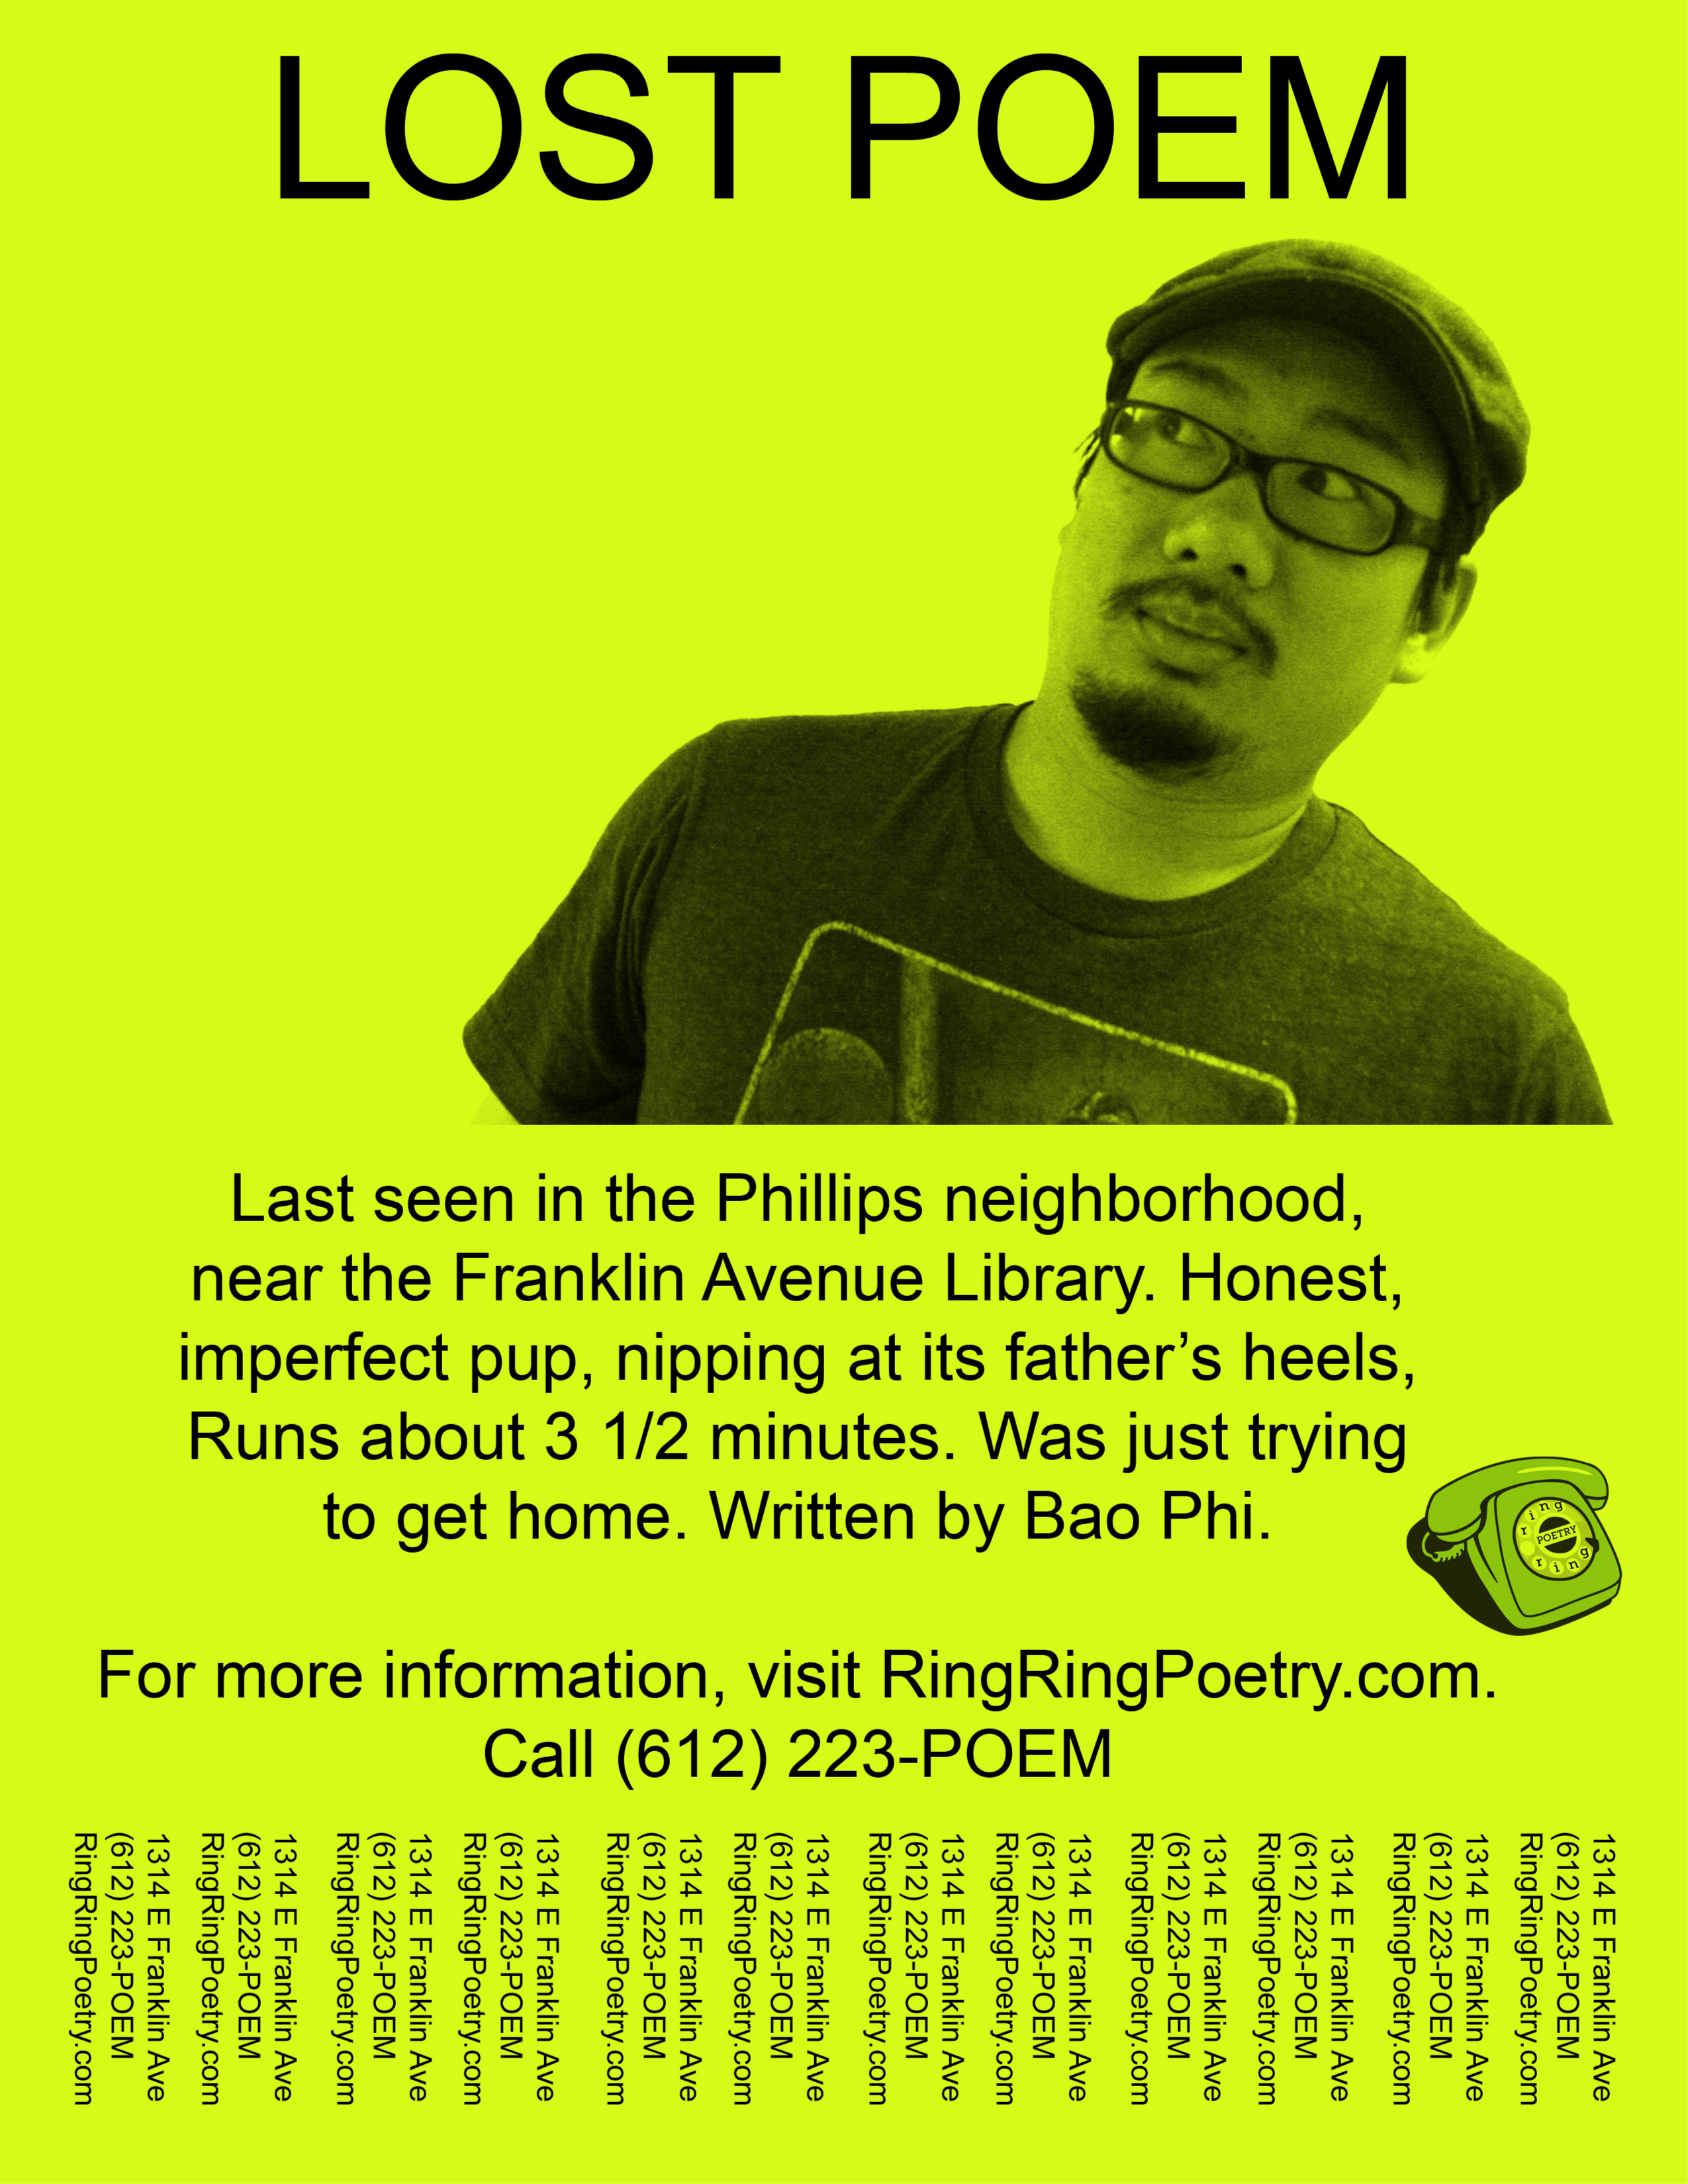 Photo of a flyer for a lost poem, featuring a candid portrait of poet Bao Phi. The flyer says, "Last seen in the Philips neighborhood, near the Franklin Avenue Library. Honest, imperfect pup, nipping at its father's heels, runs about 3 1/2 minutes. Was just trying to get home. Written by Bao Phi. For more information, visit RingRingPoetry.com. Call (612) 223-POEM